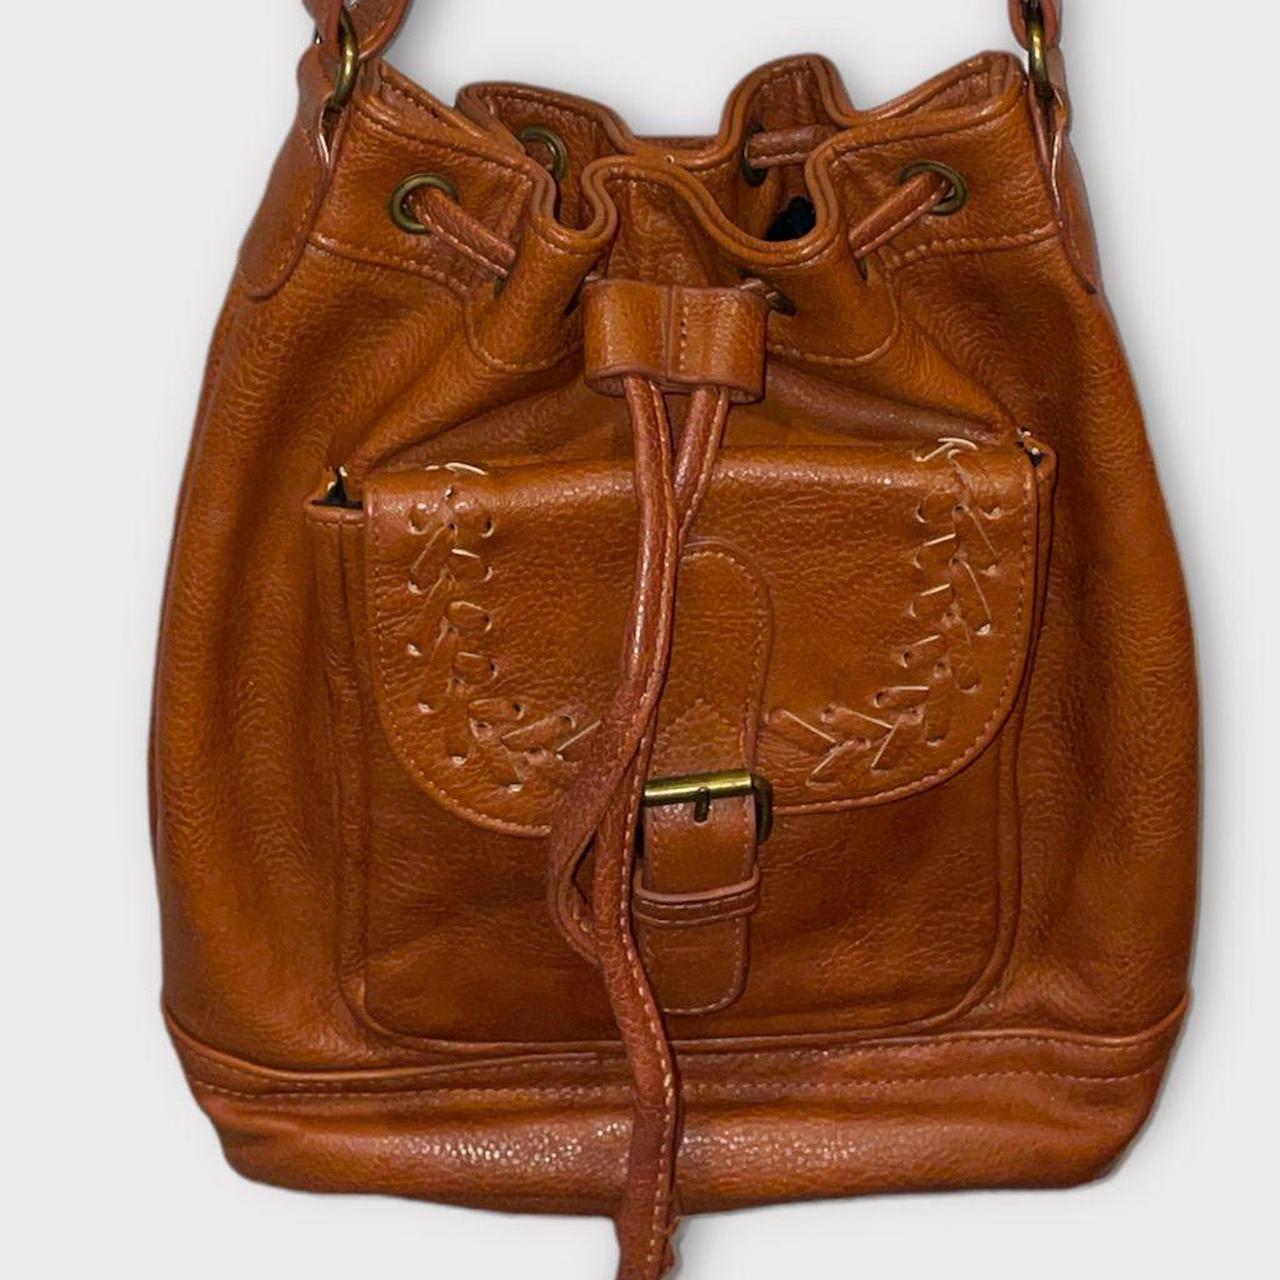 Product Image 1 - This Mossimo bucket bag is